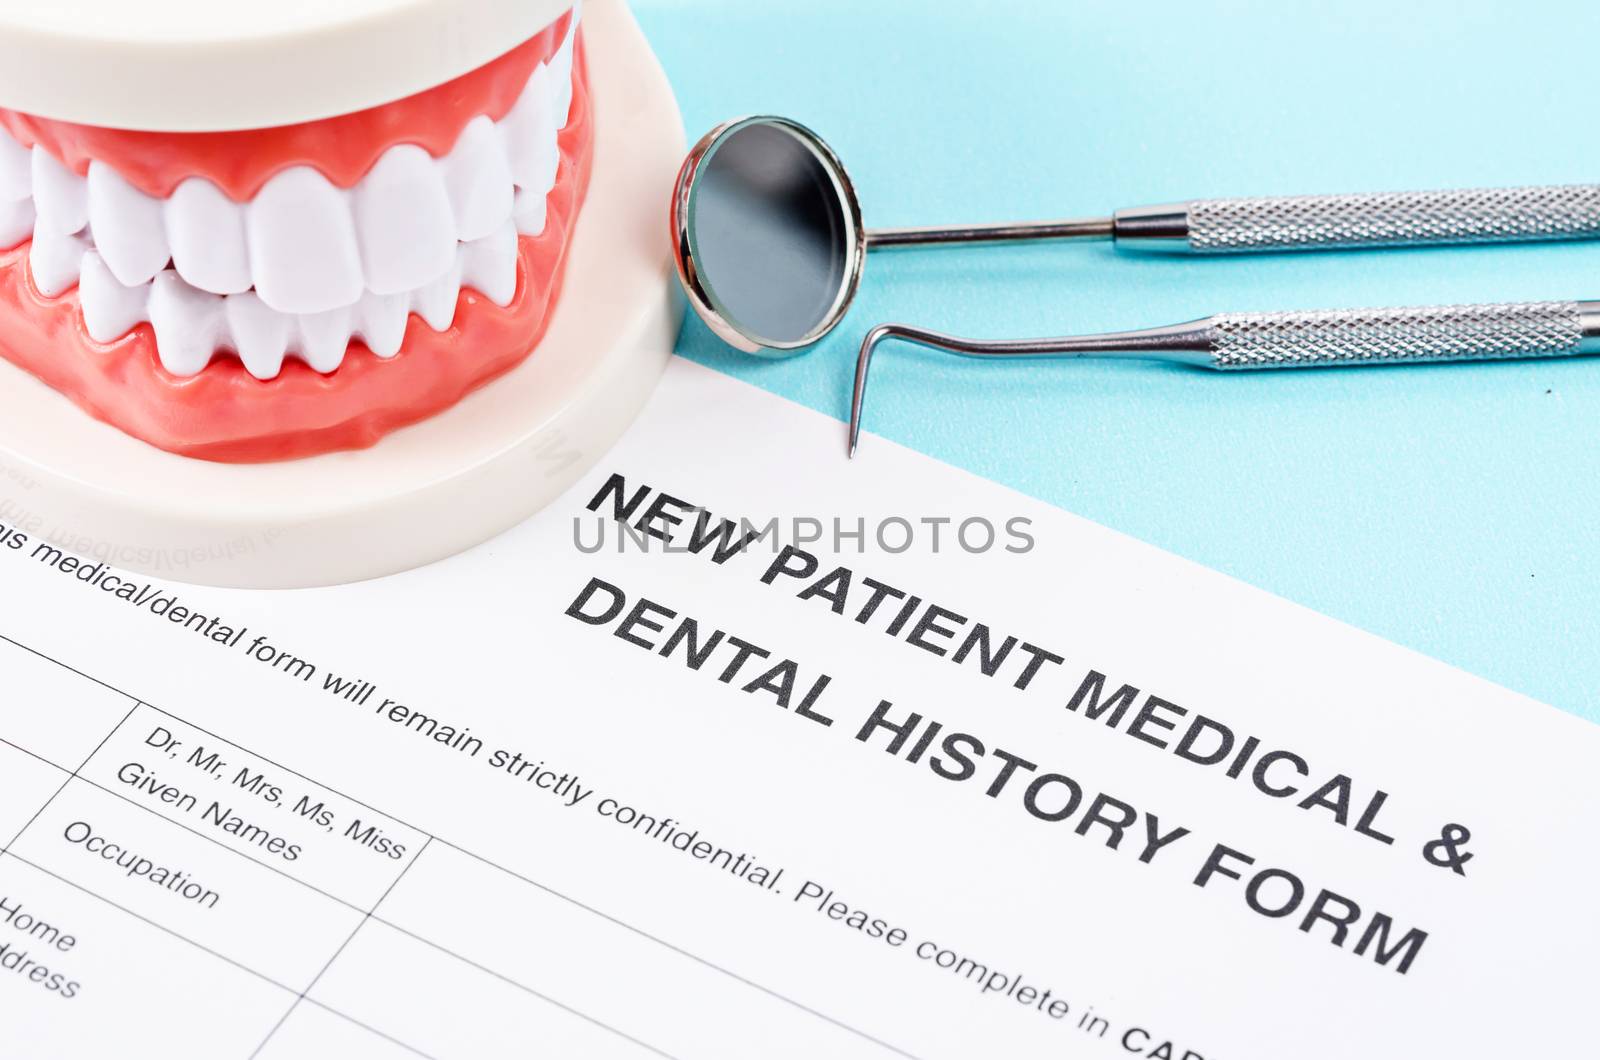 Dental history form with model tooth and dental instruments. Dental health and teeth care concept.